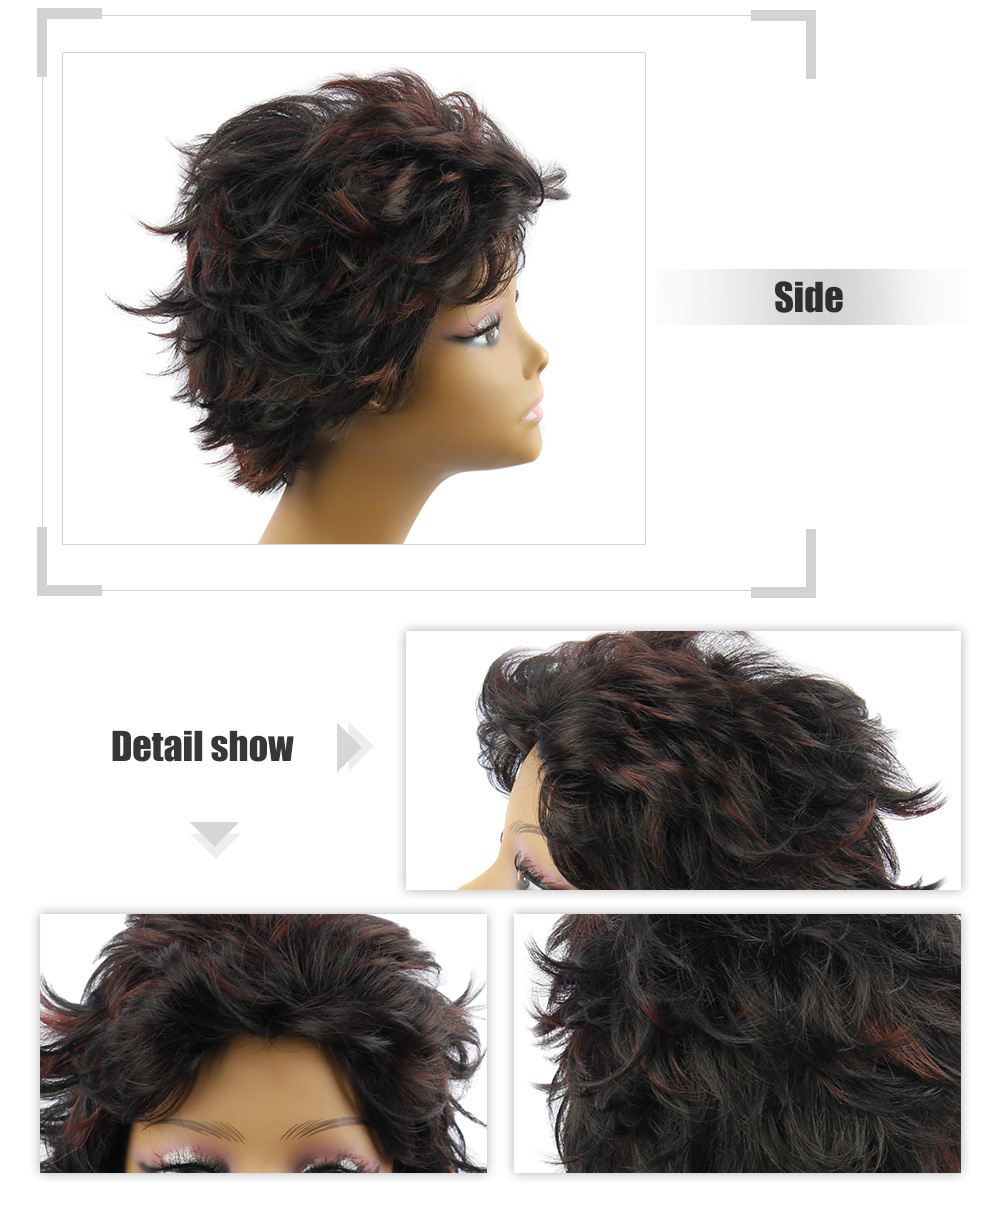 AISIHAIR Women Short Slightly Curly Black and Coffee Synthetic Wigs